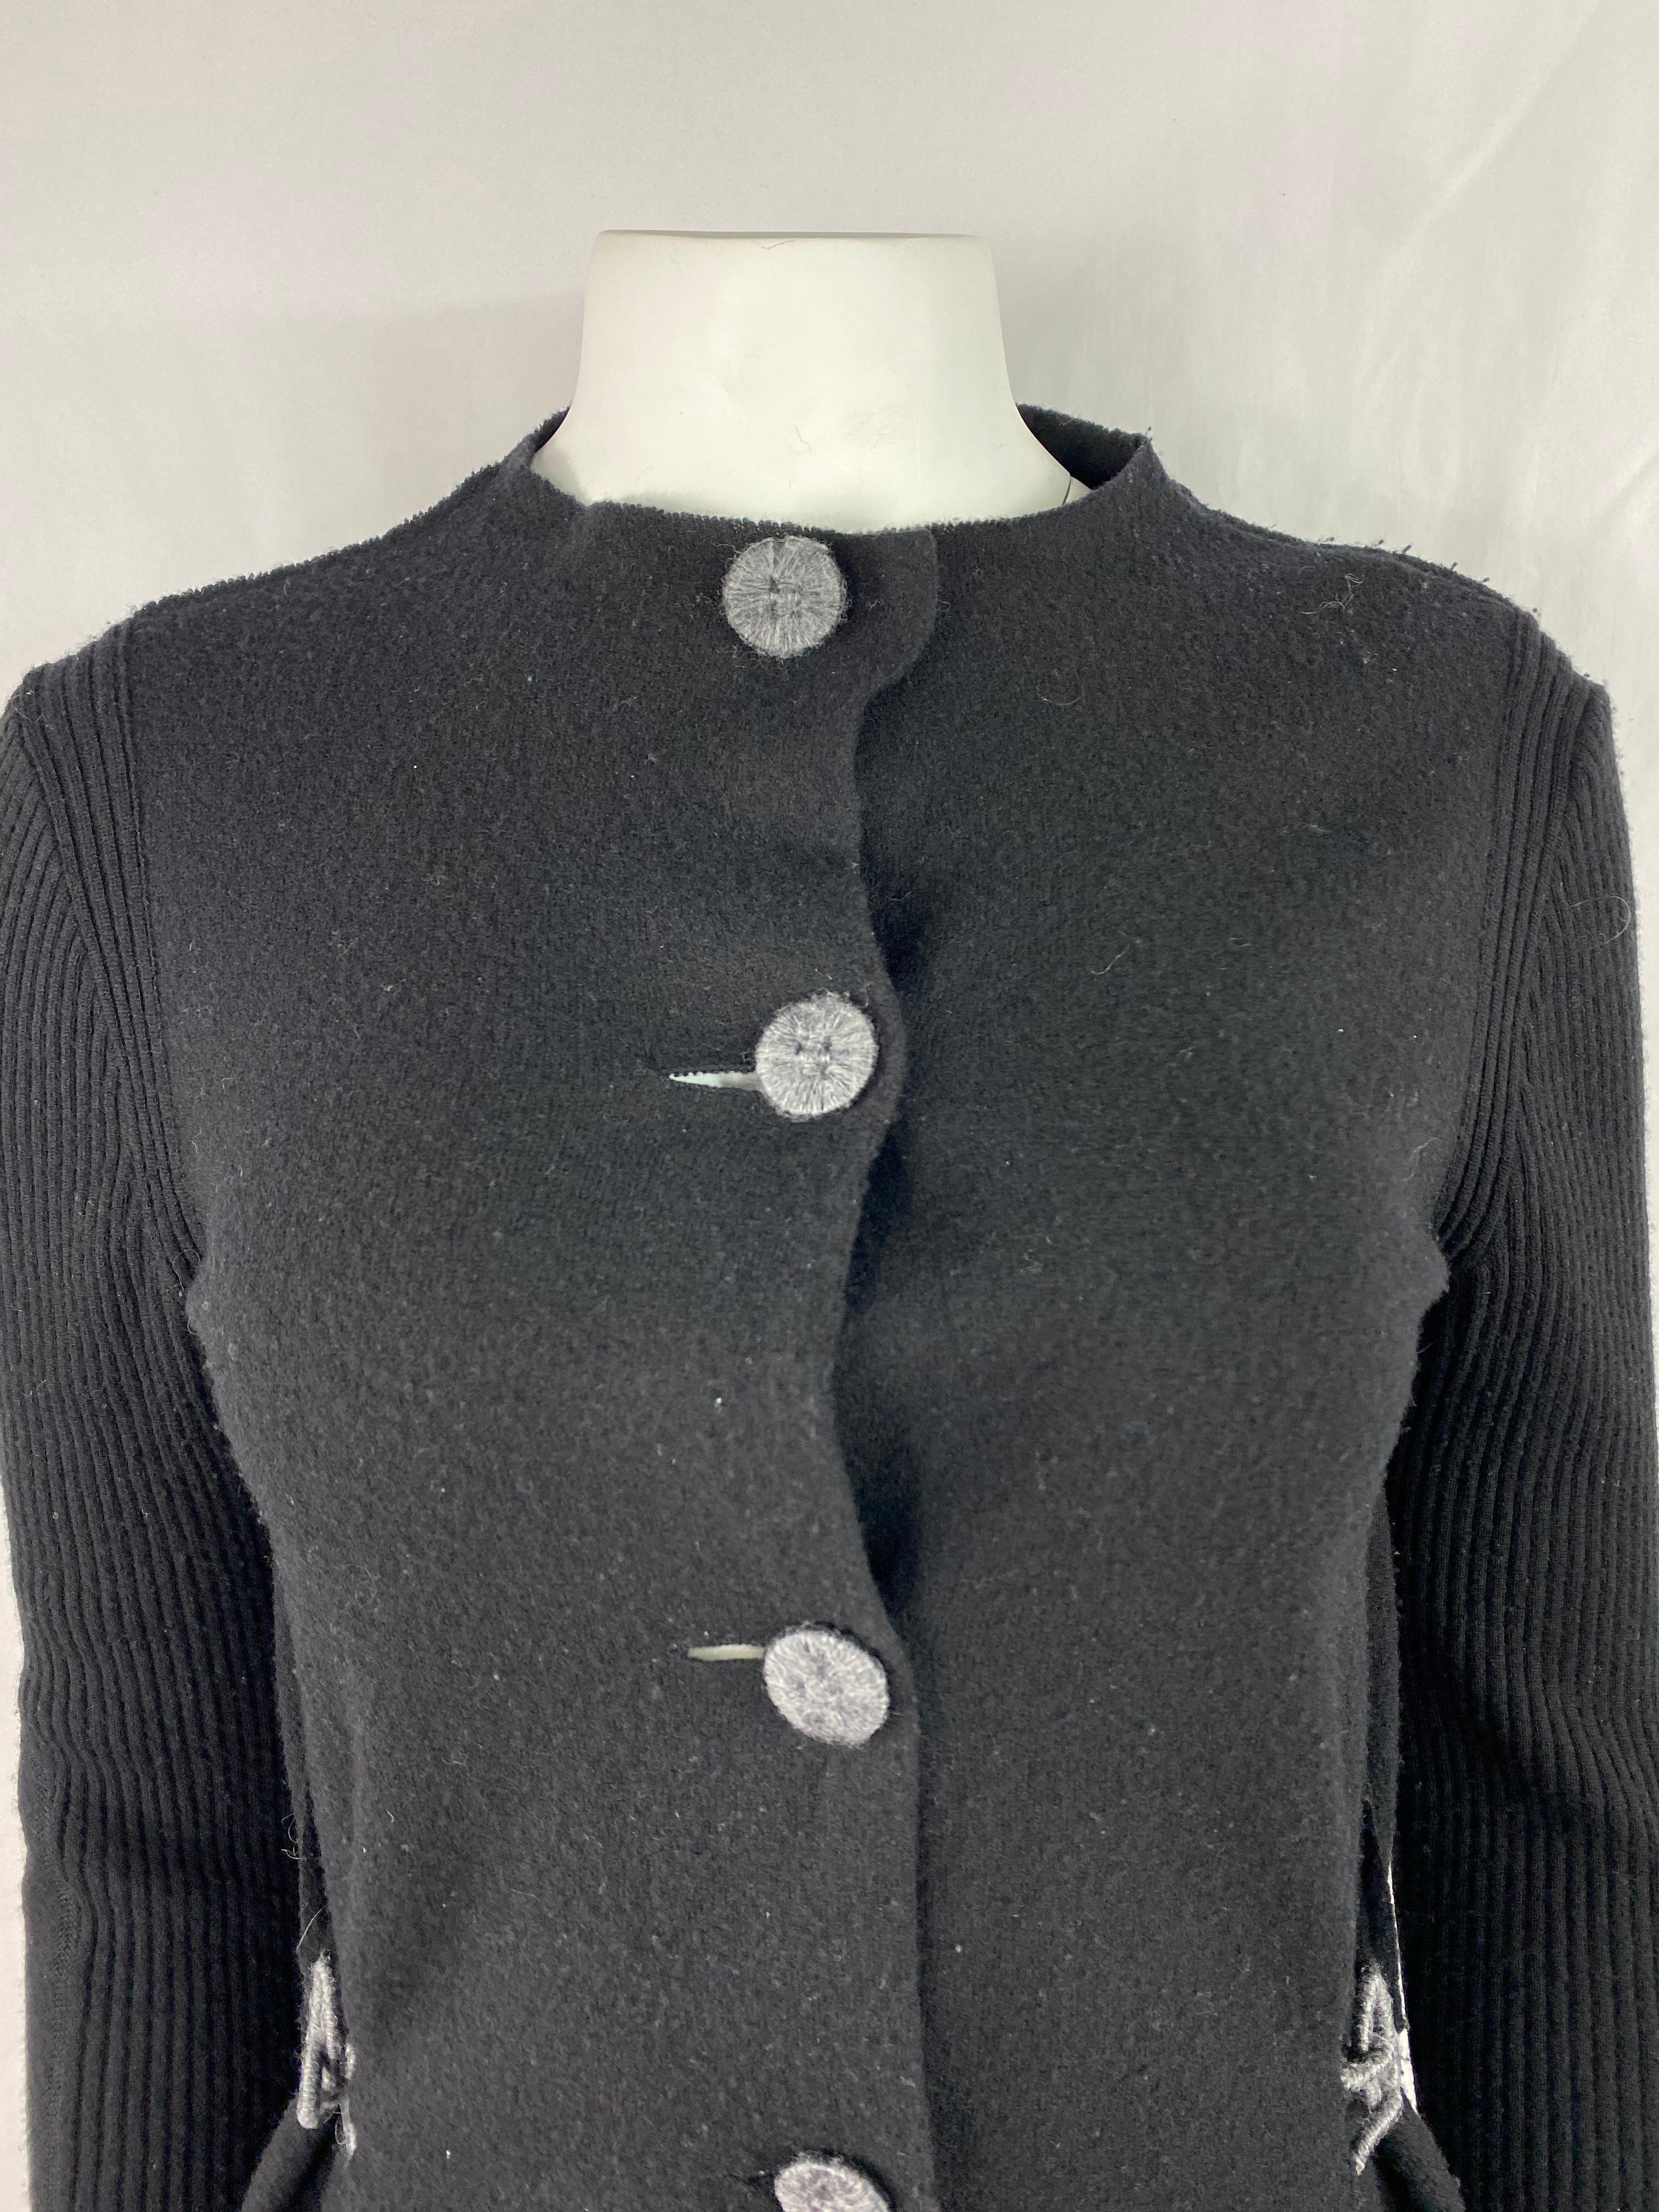 Product details:

The sweater features long sleeves, crew neck line, front large grey buttons closure, side grey hook on each side and ribbed finish on the sleeves. Made in Italy.